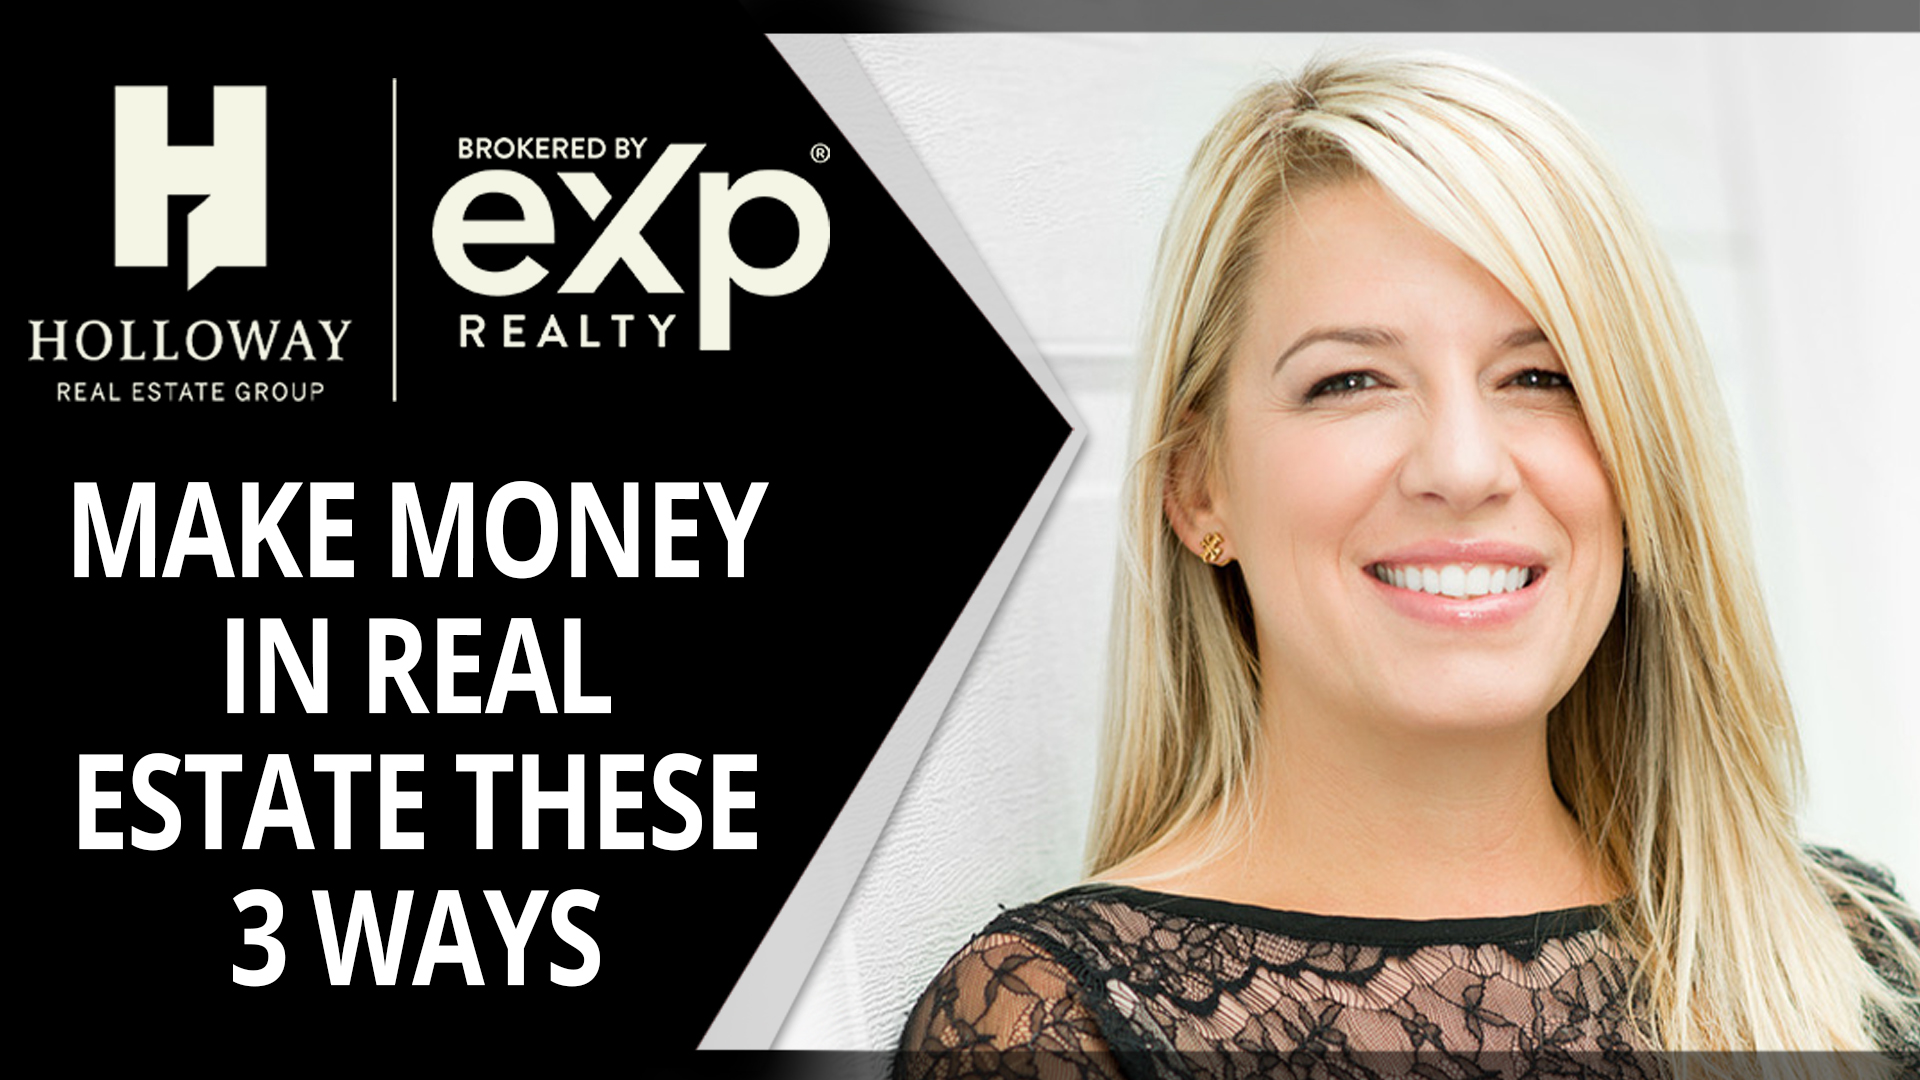 The 3 Ways To Make Money in Real Estate